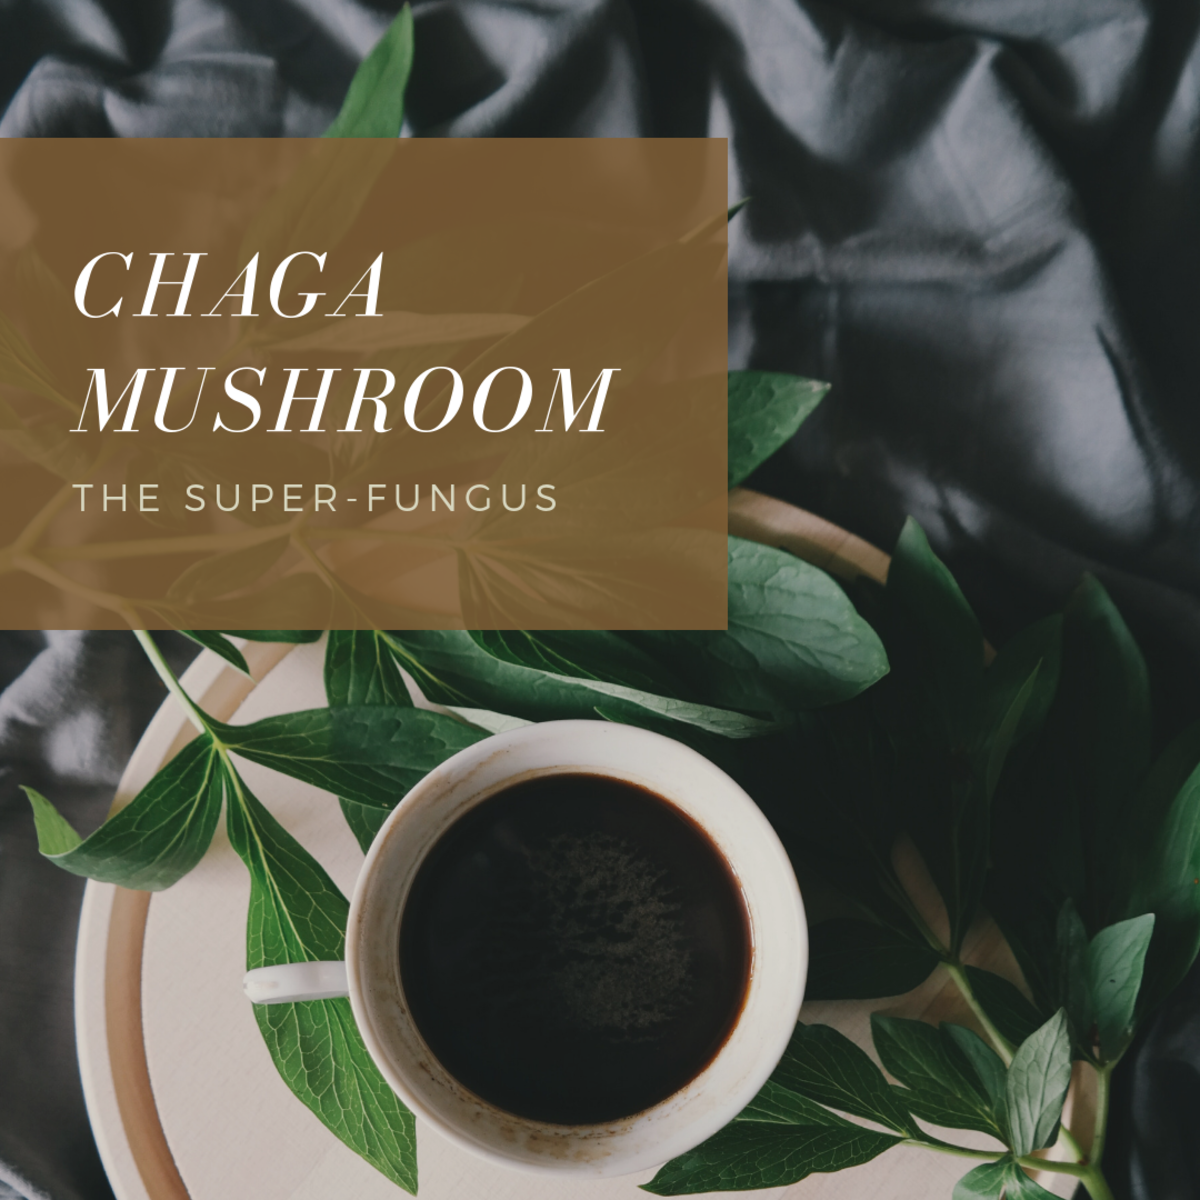 Chaga mushroom is a super-fungus and packed with tons of nutrients.